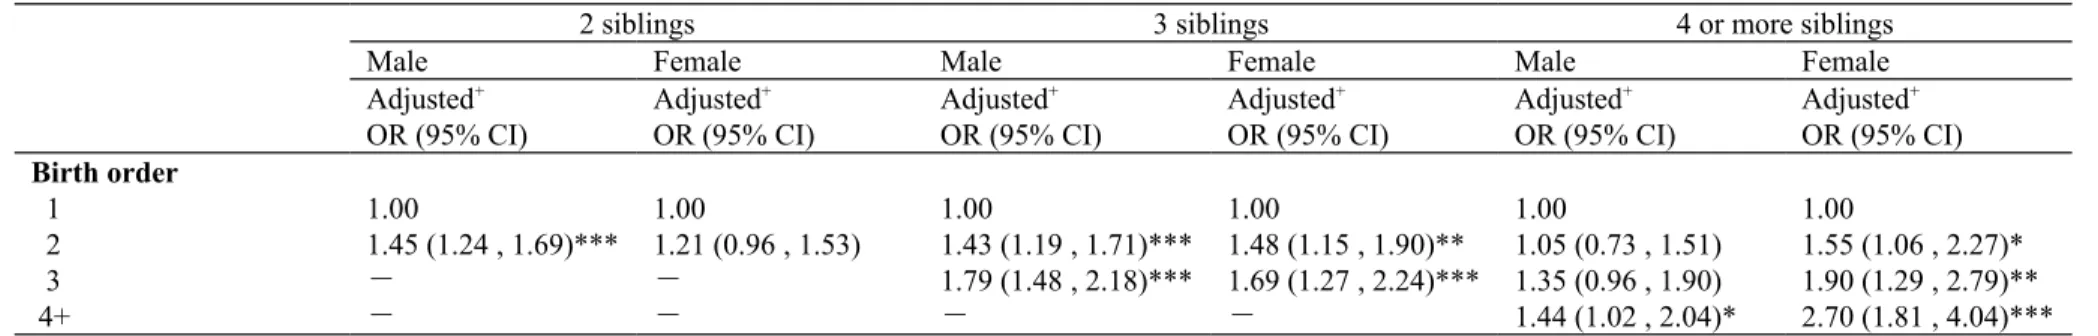 Table 4: Associations between birth order and risk of suicide stratifying by sex and sibship size 